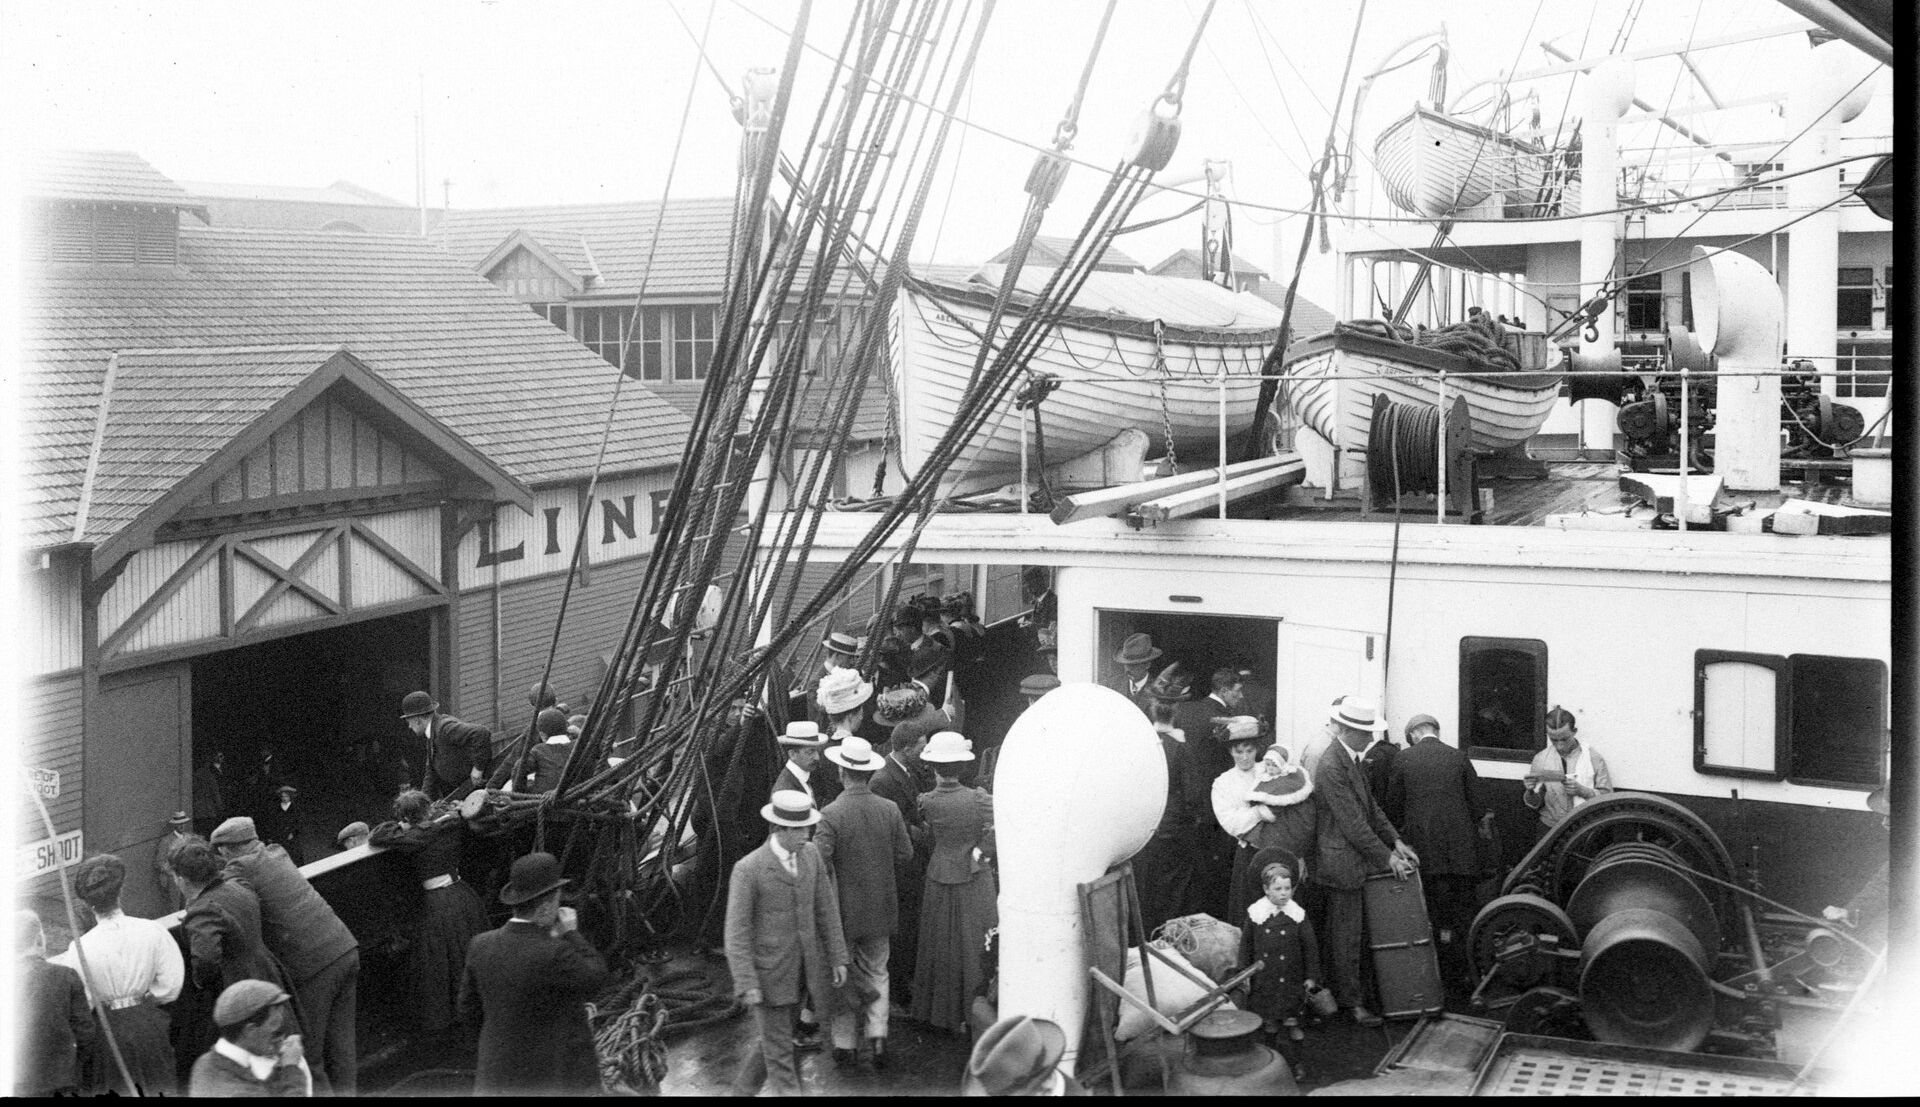 People crowd onto the deck of a ship